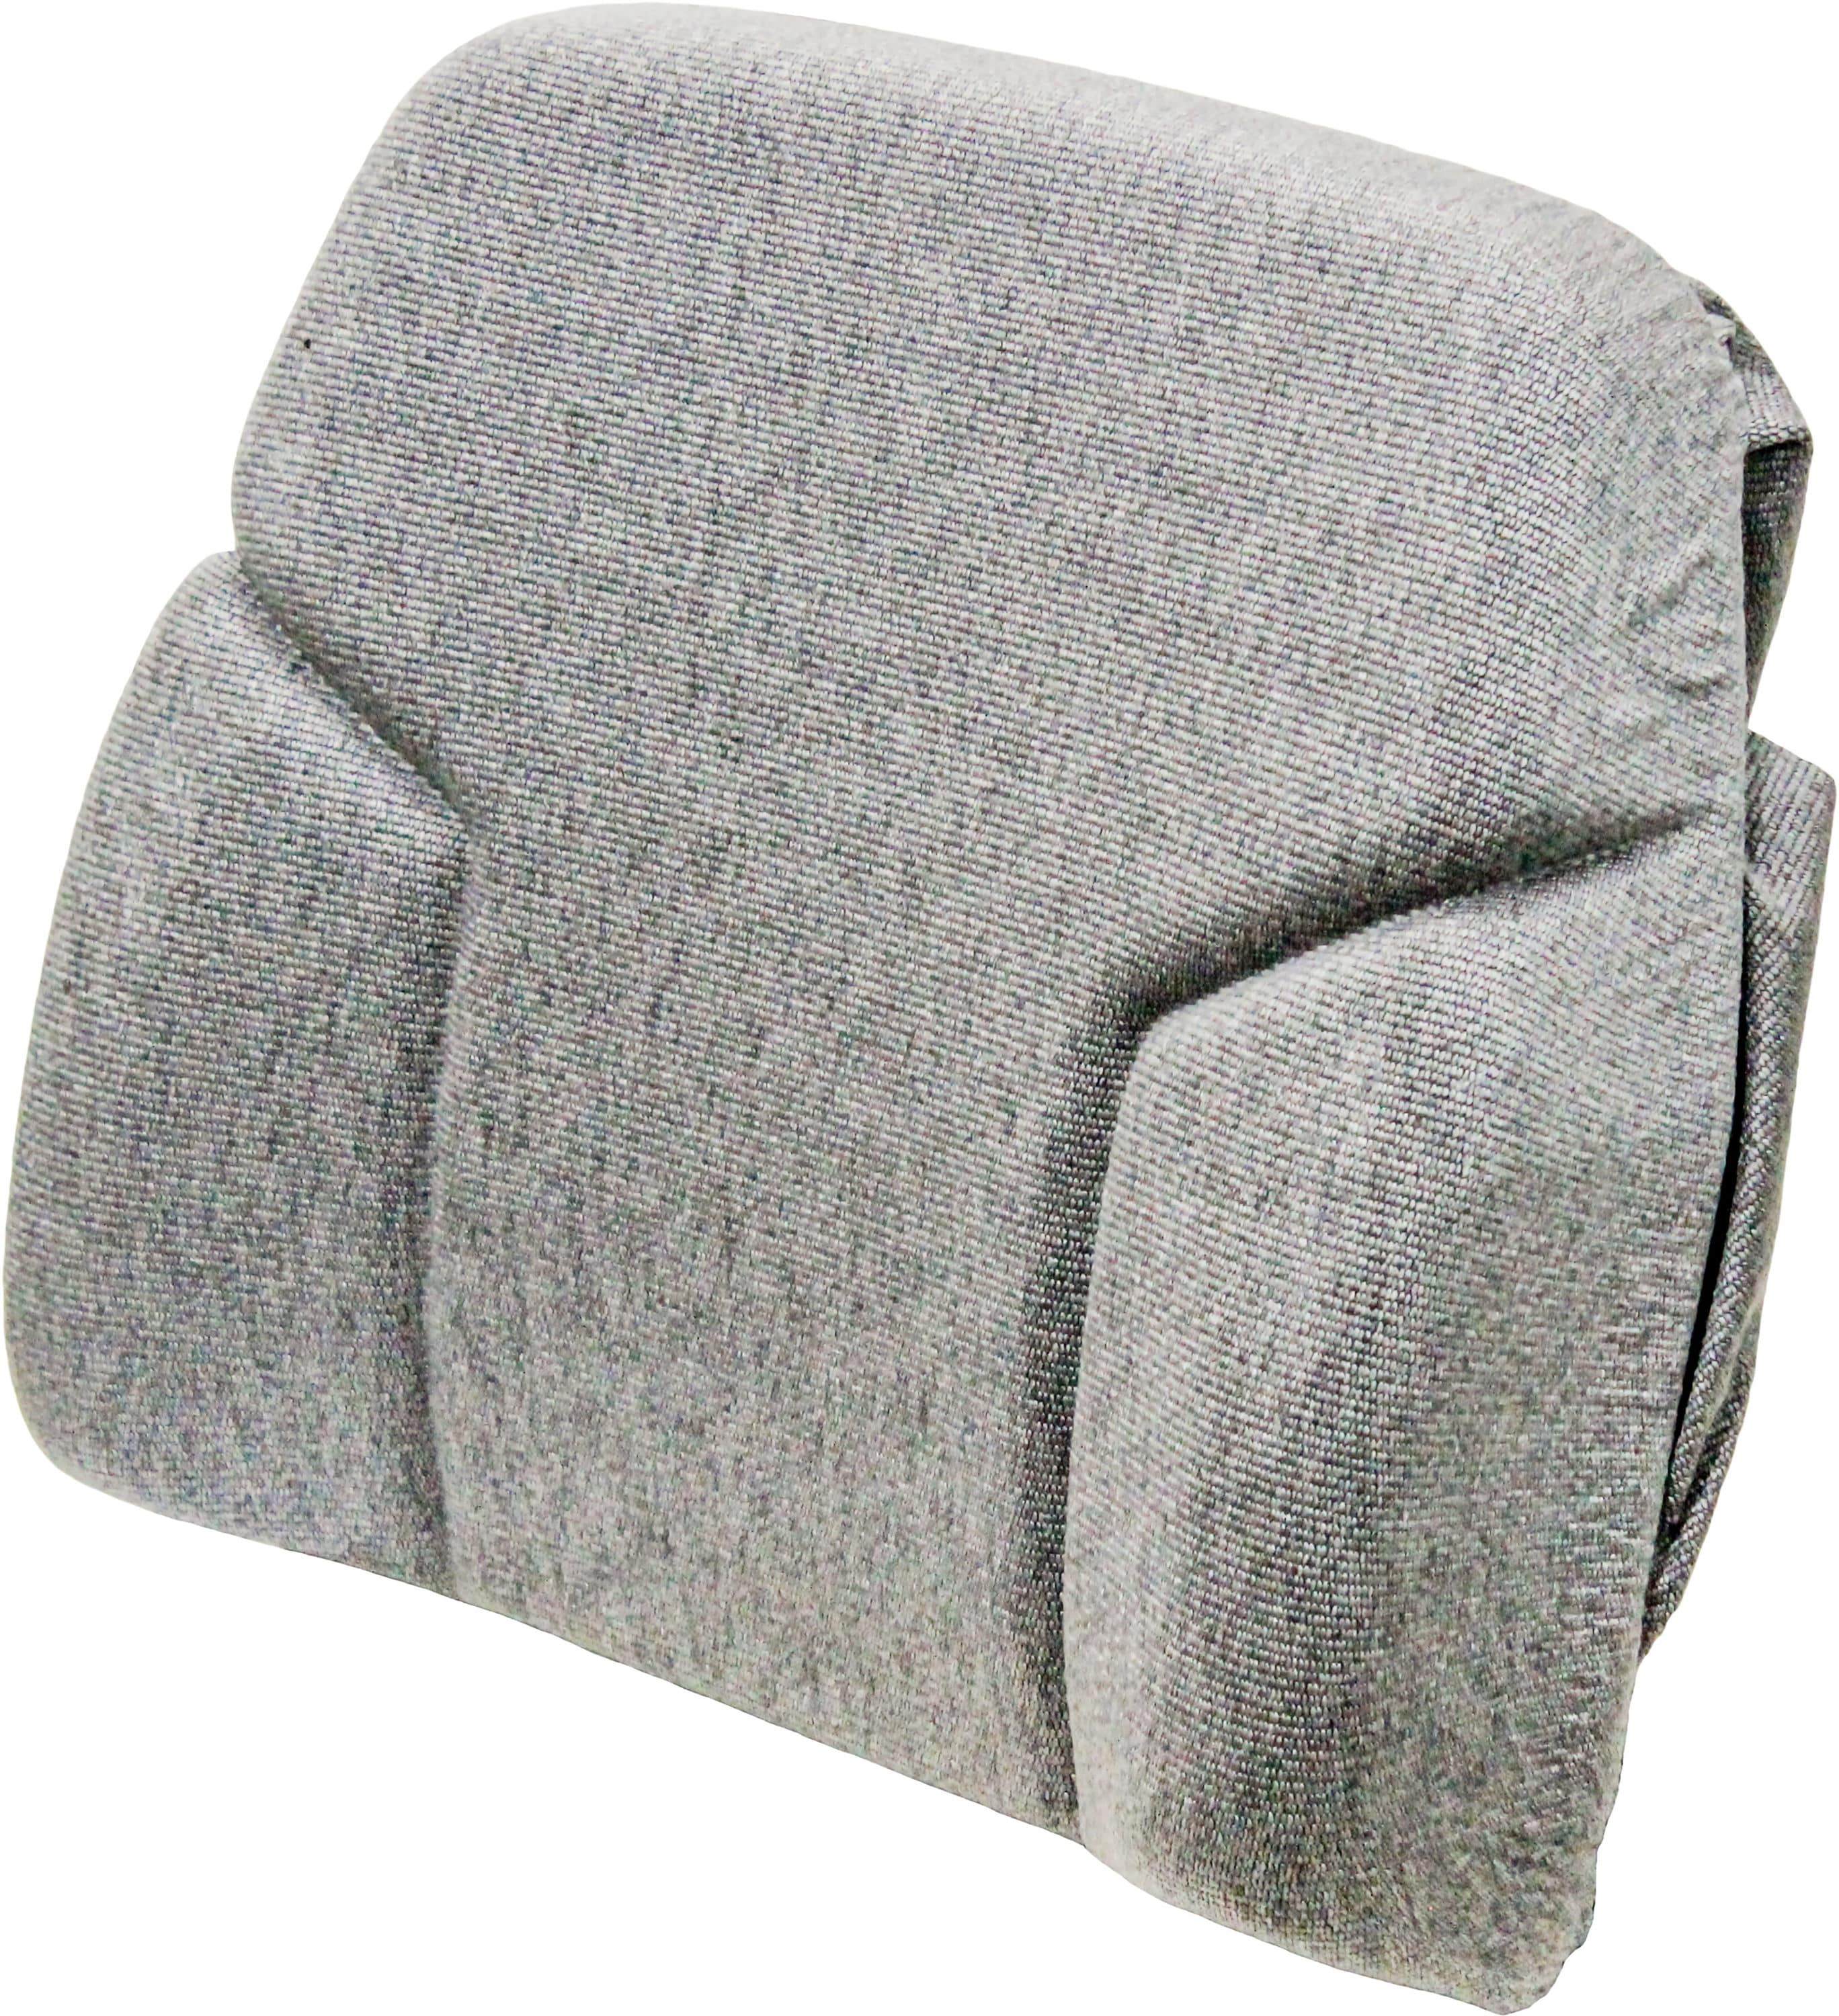 CIH Magnum Seat Cushion with Frame Seat in the Riding Lawn Mower